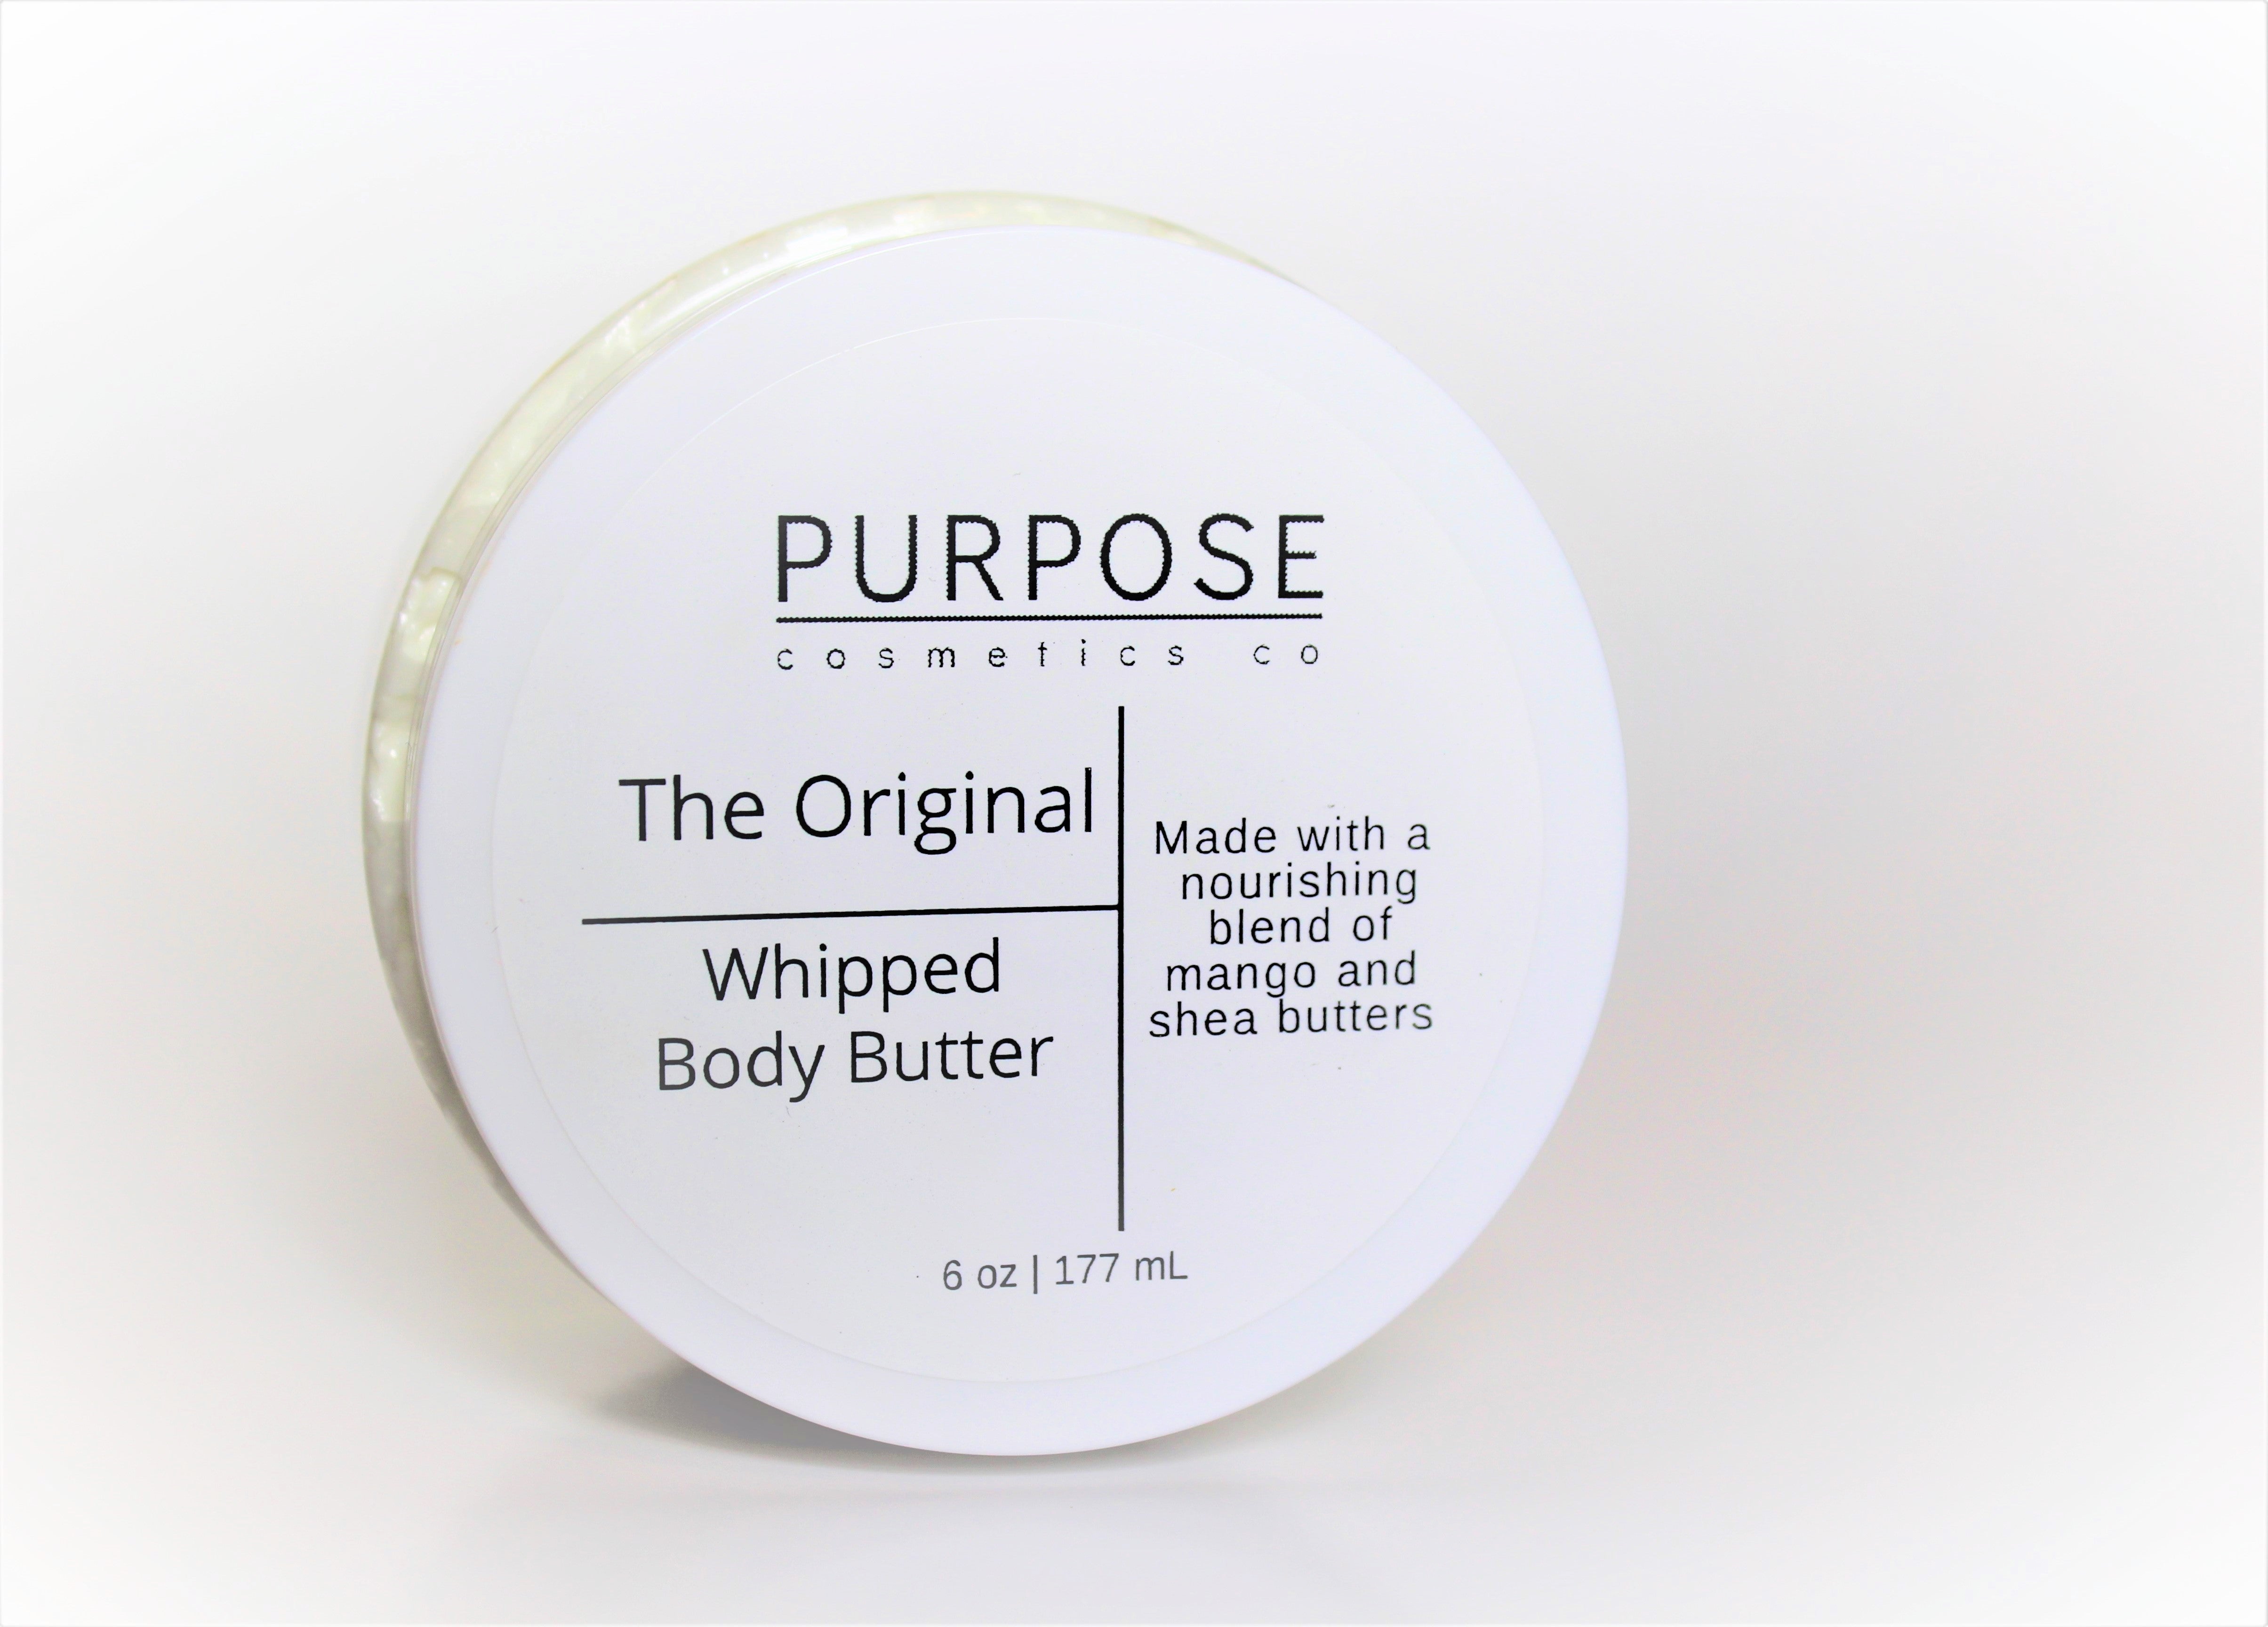 The Original Whipped Body Butter